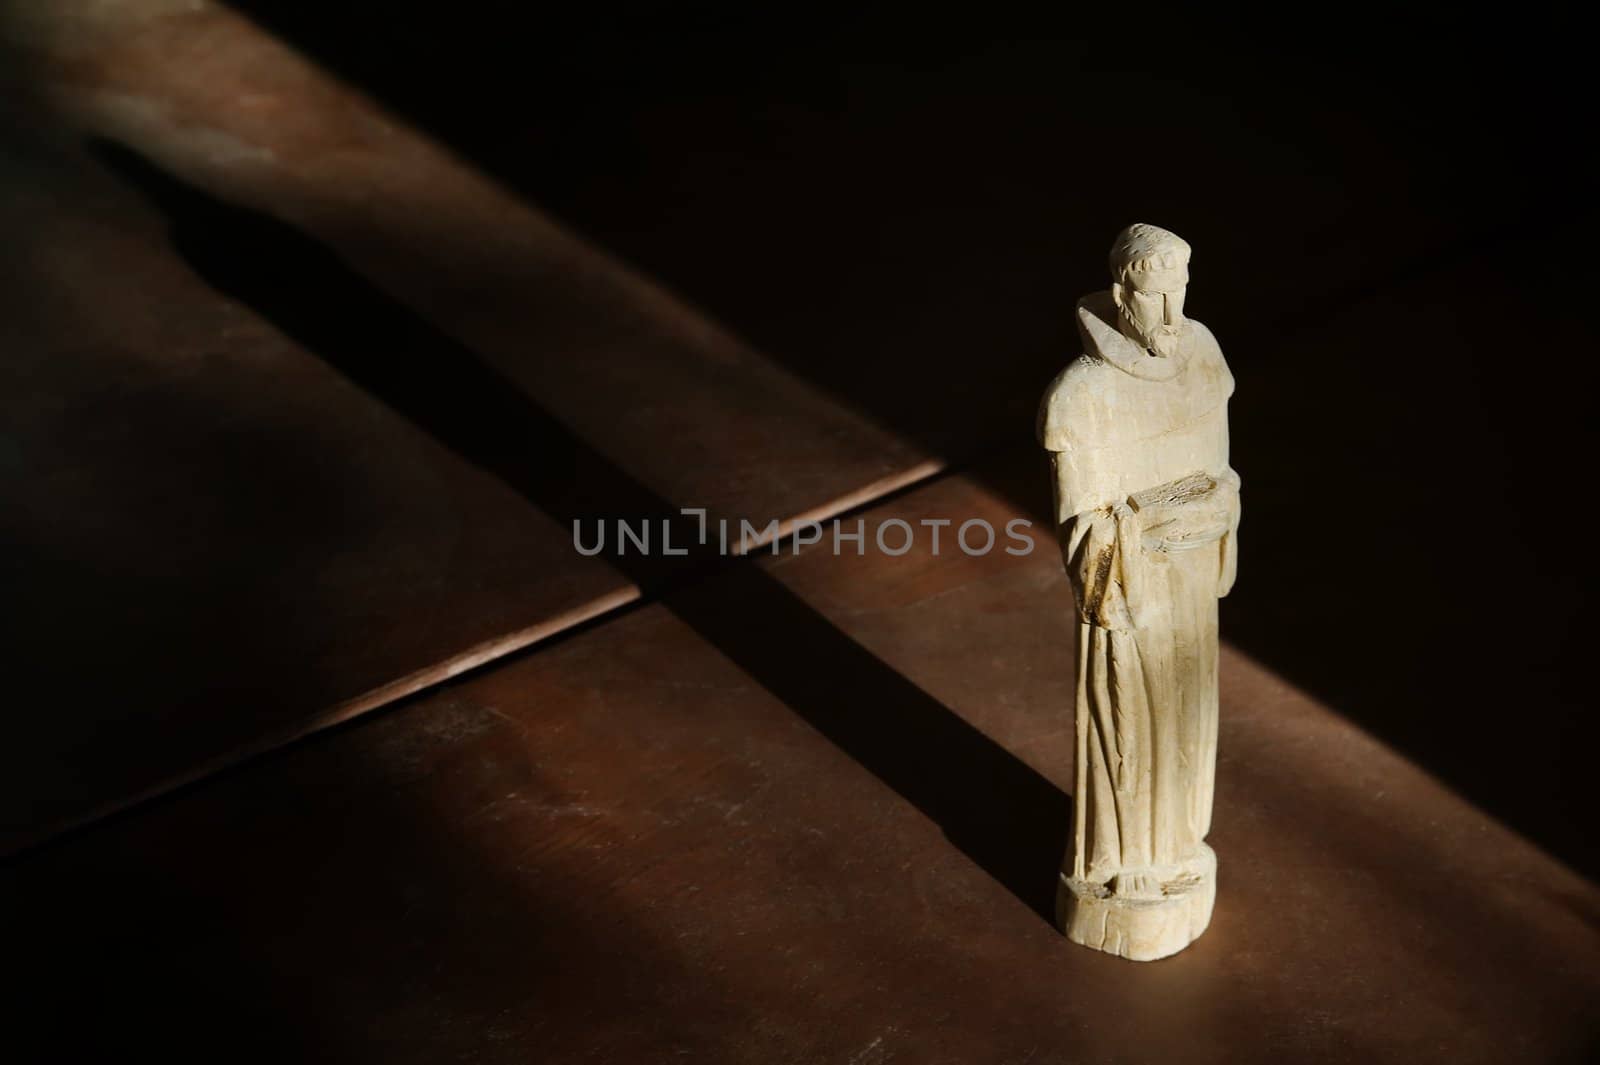 Wooden Statue of St. Francis in Afternoon Light with Shadow